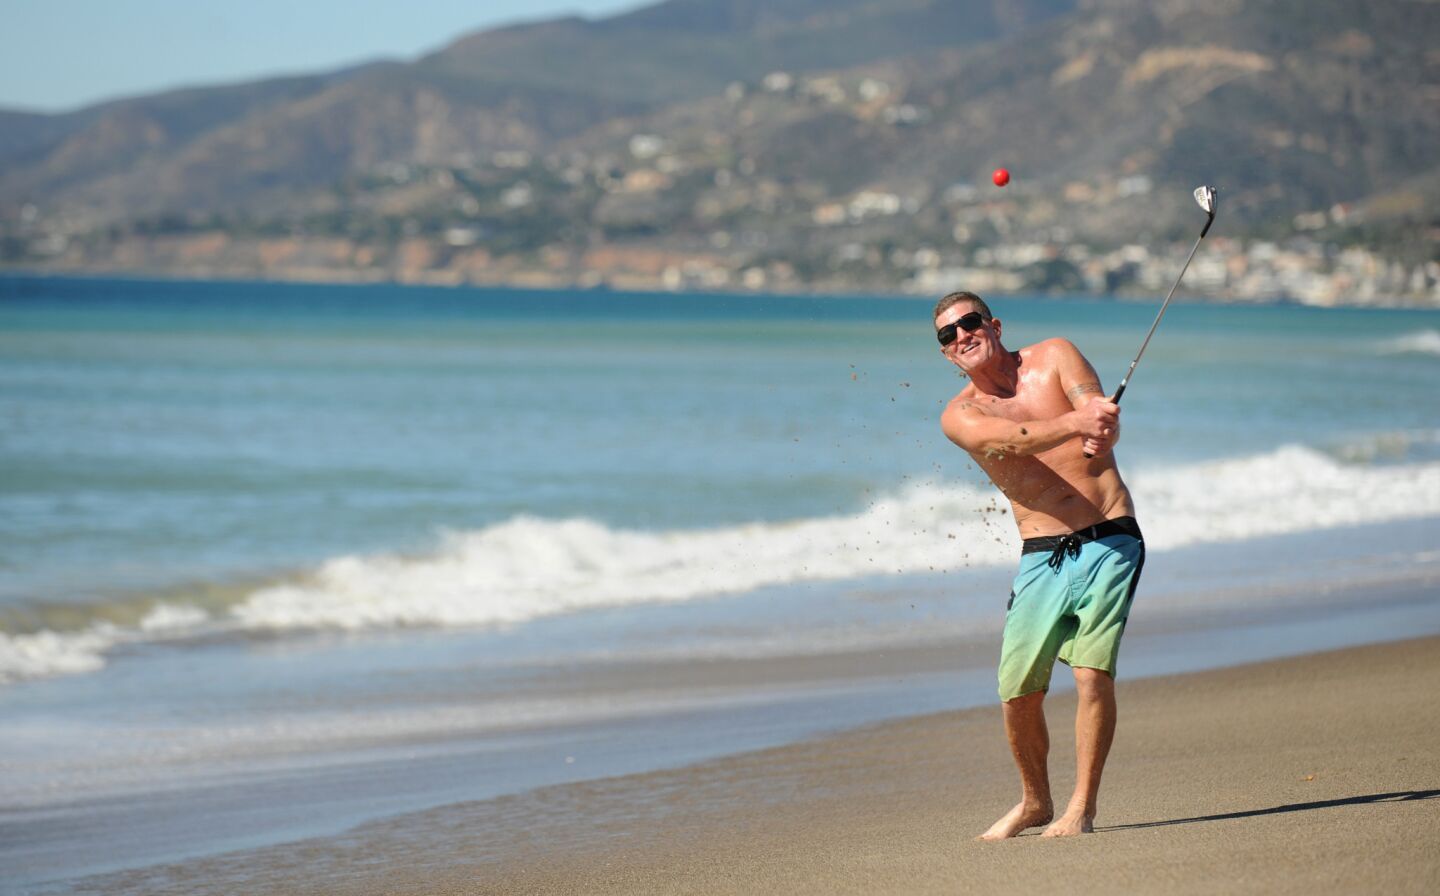 Dan Charcoal, who is vacationing in Southern California from Maui, golfs on Zuma Beach during a hot winter day Monday.